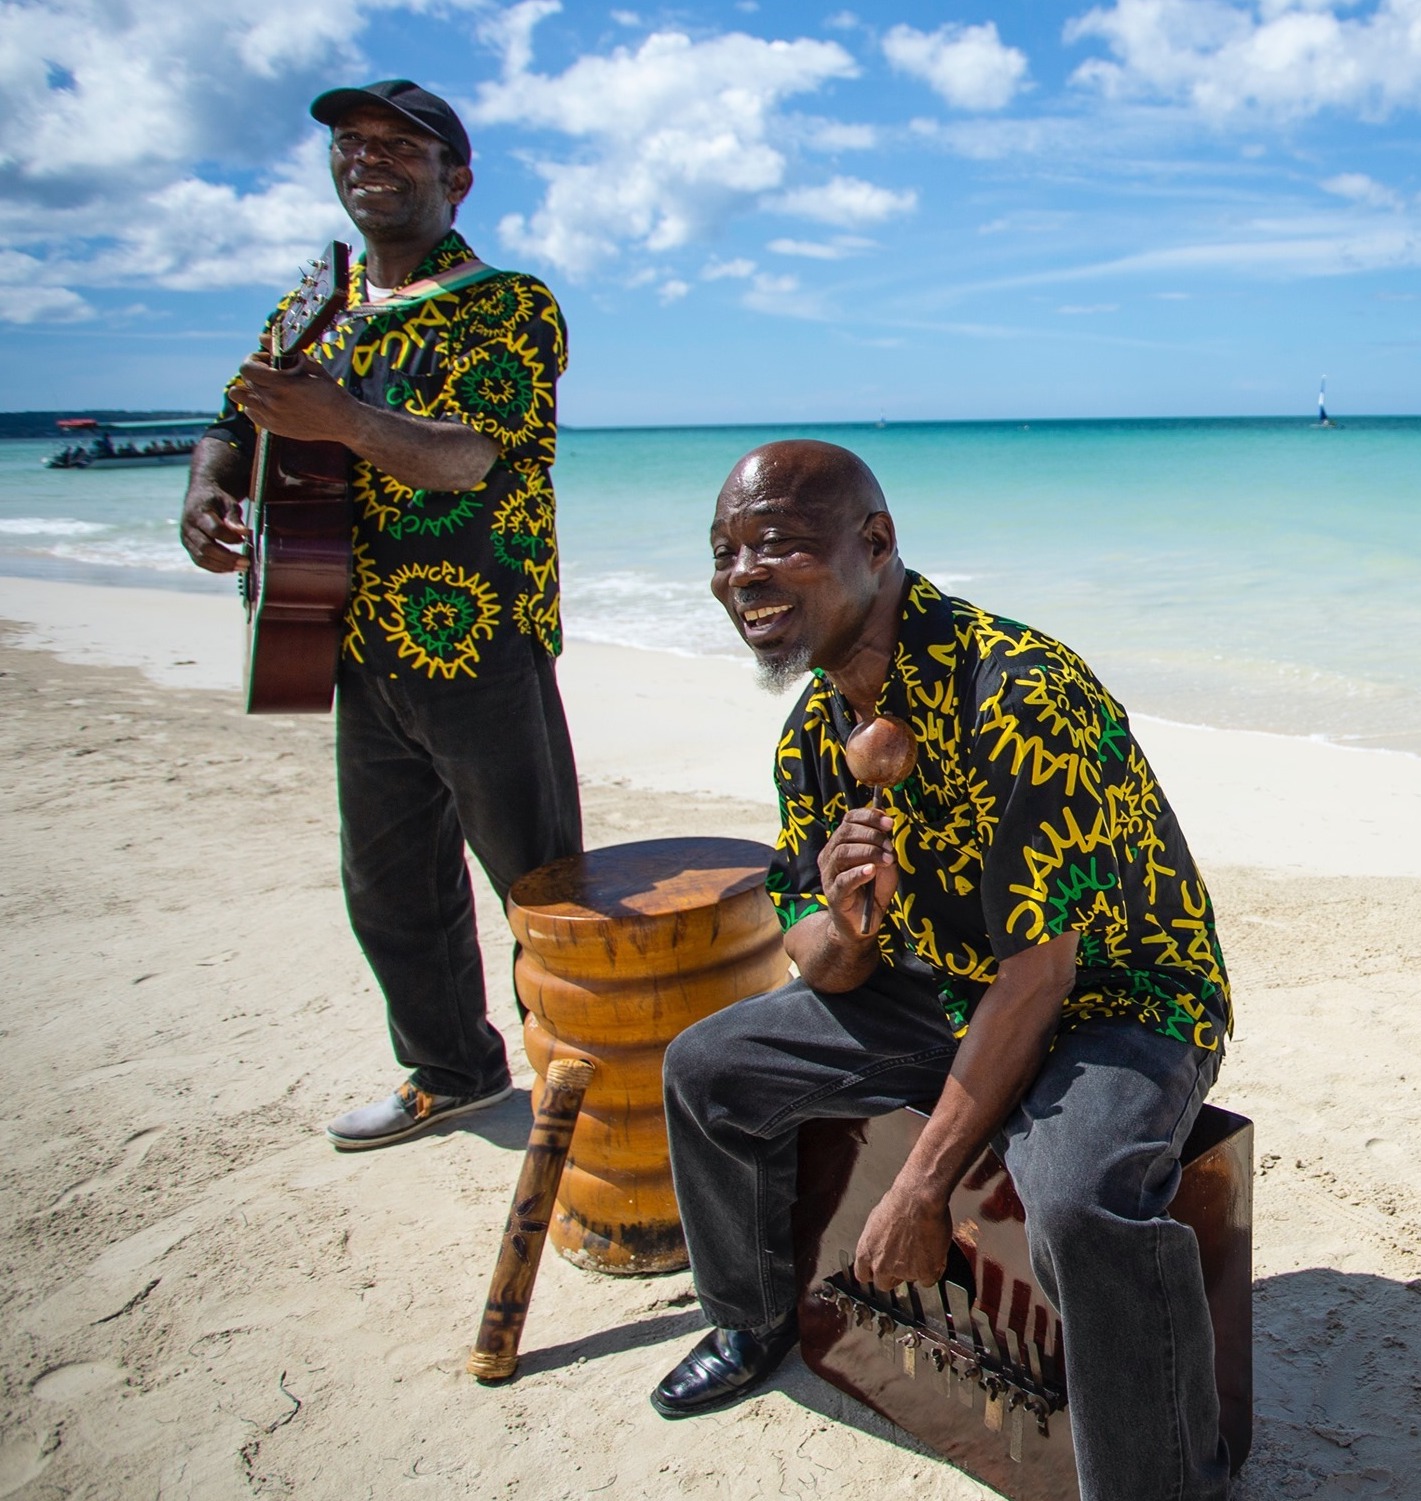 The Rich Mosaic of Cultures in the Caribbean: From Jamaica to the Islands Beyond